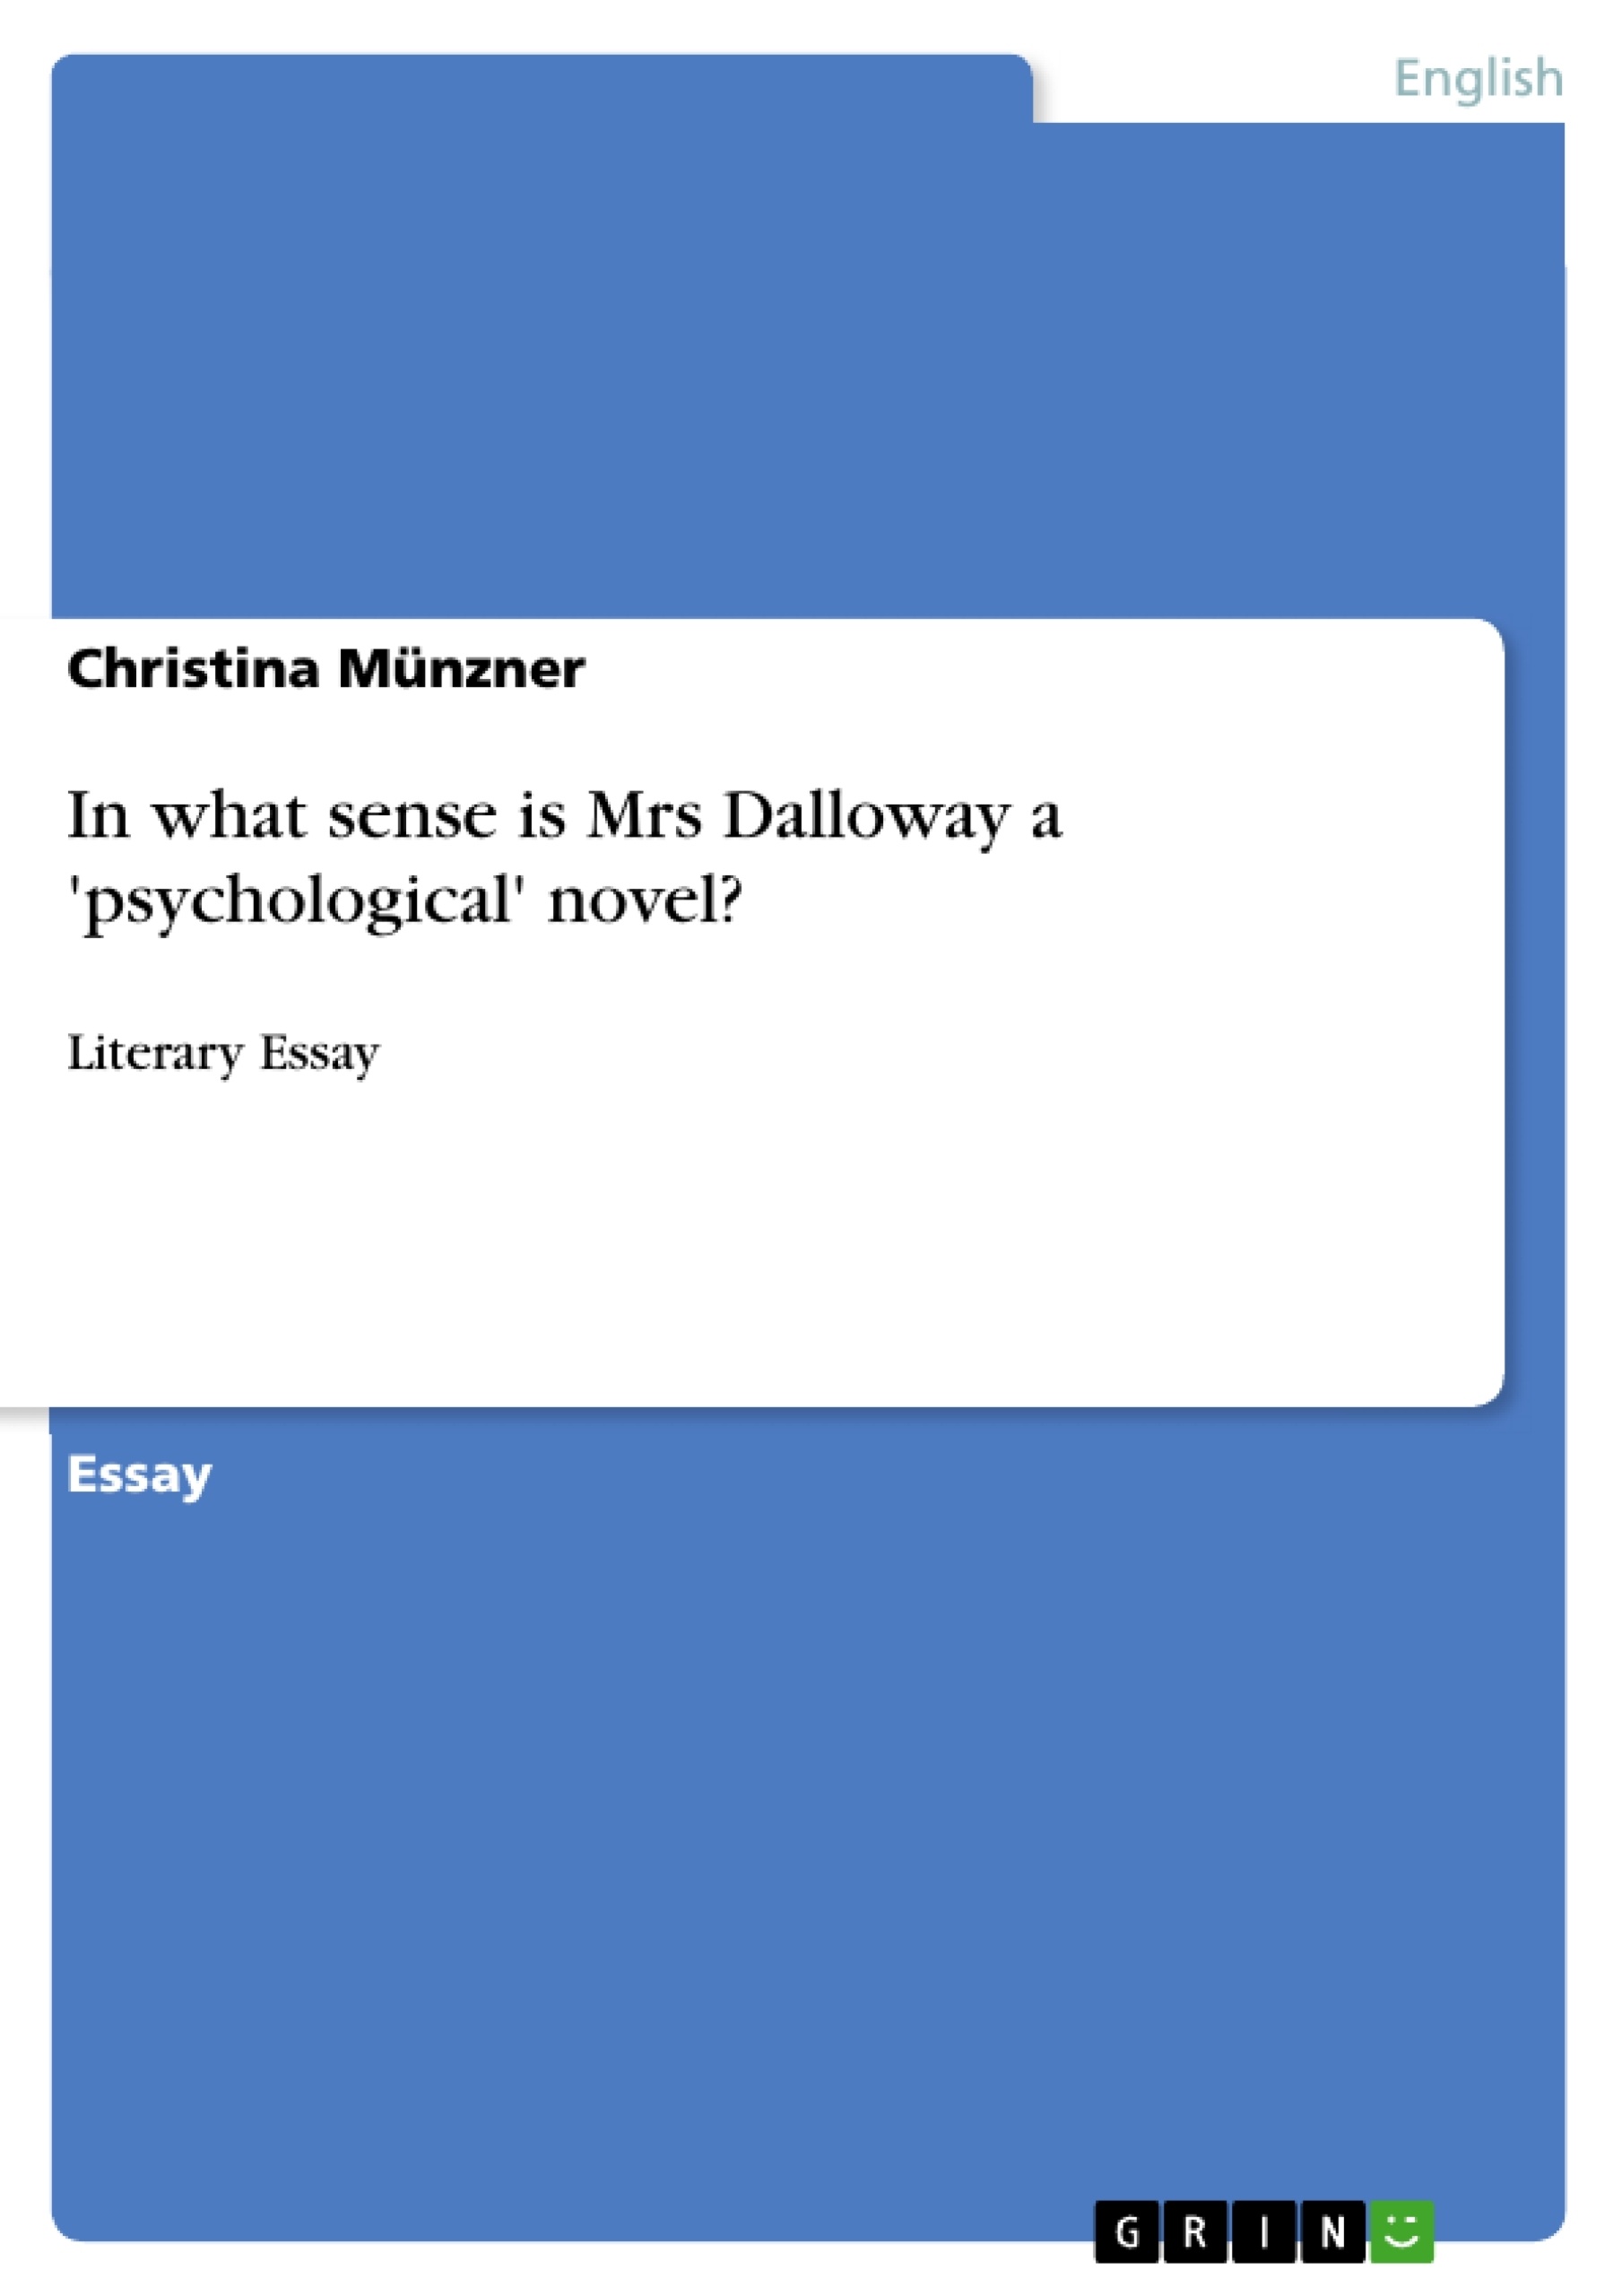 Title: In what sense is Mrs Dalloway a 'psychological' novel?